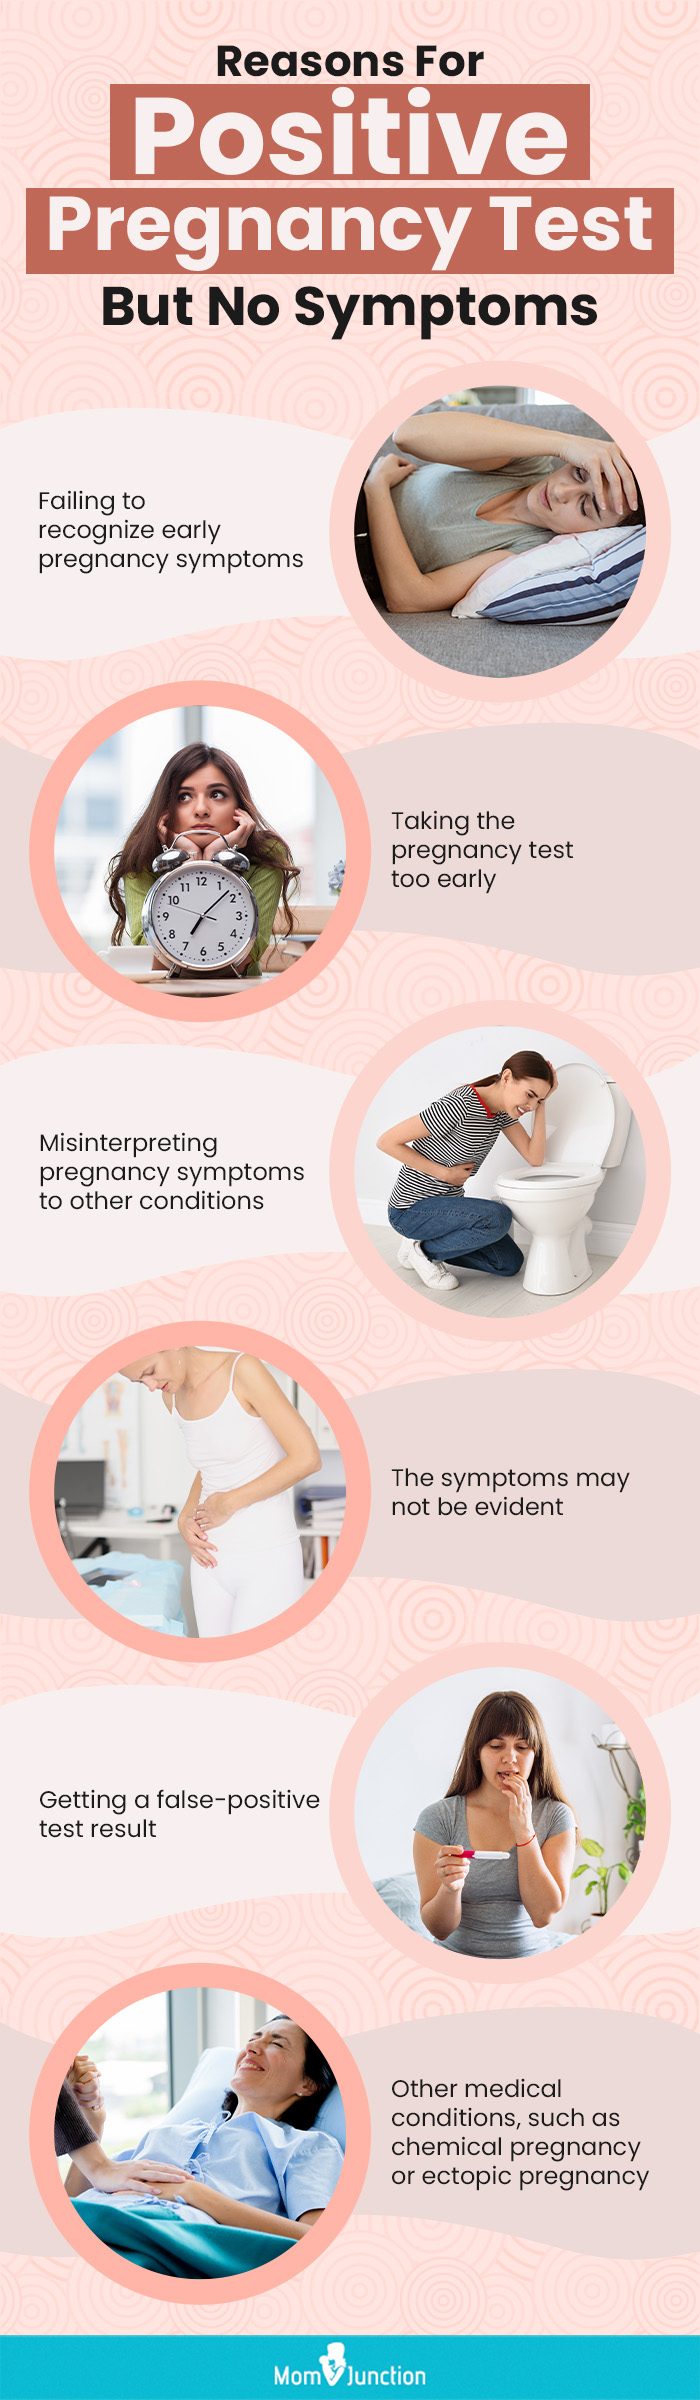 reasons for positive pregnancy test but no symptoms (infographic)